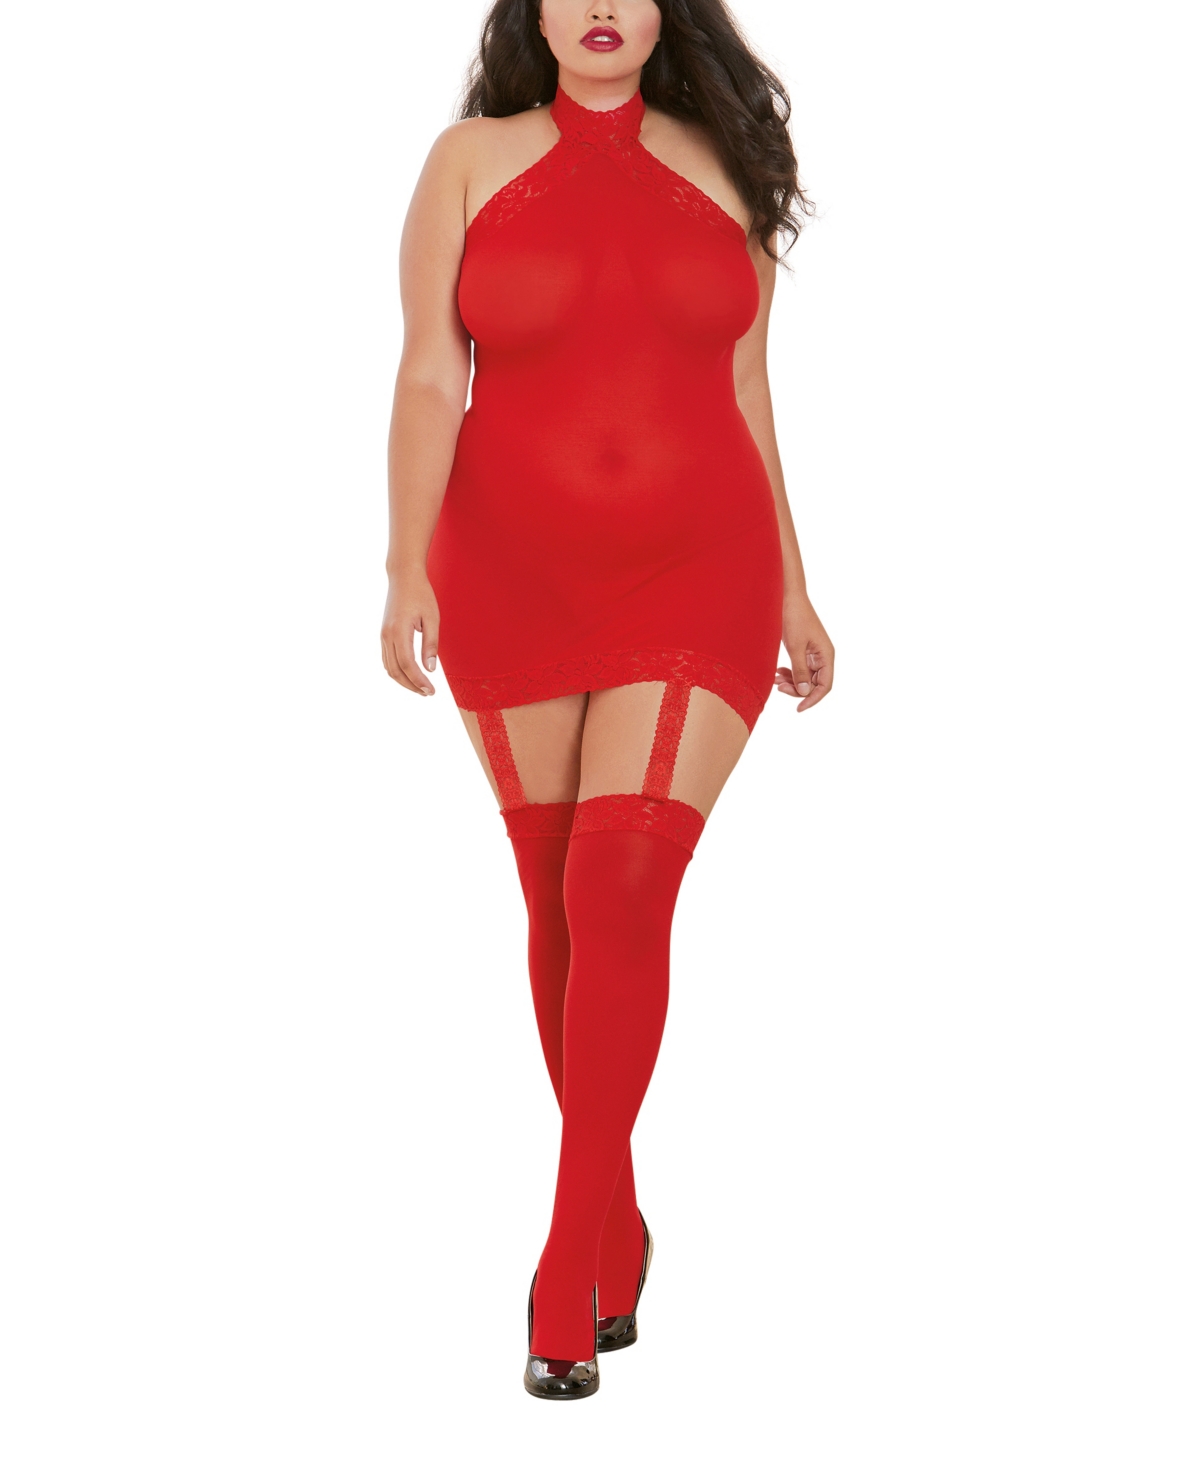 Women's Plus Size Sheer Halter Garter Dress with Attached Garters and Stockings Lingerie Set - Red